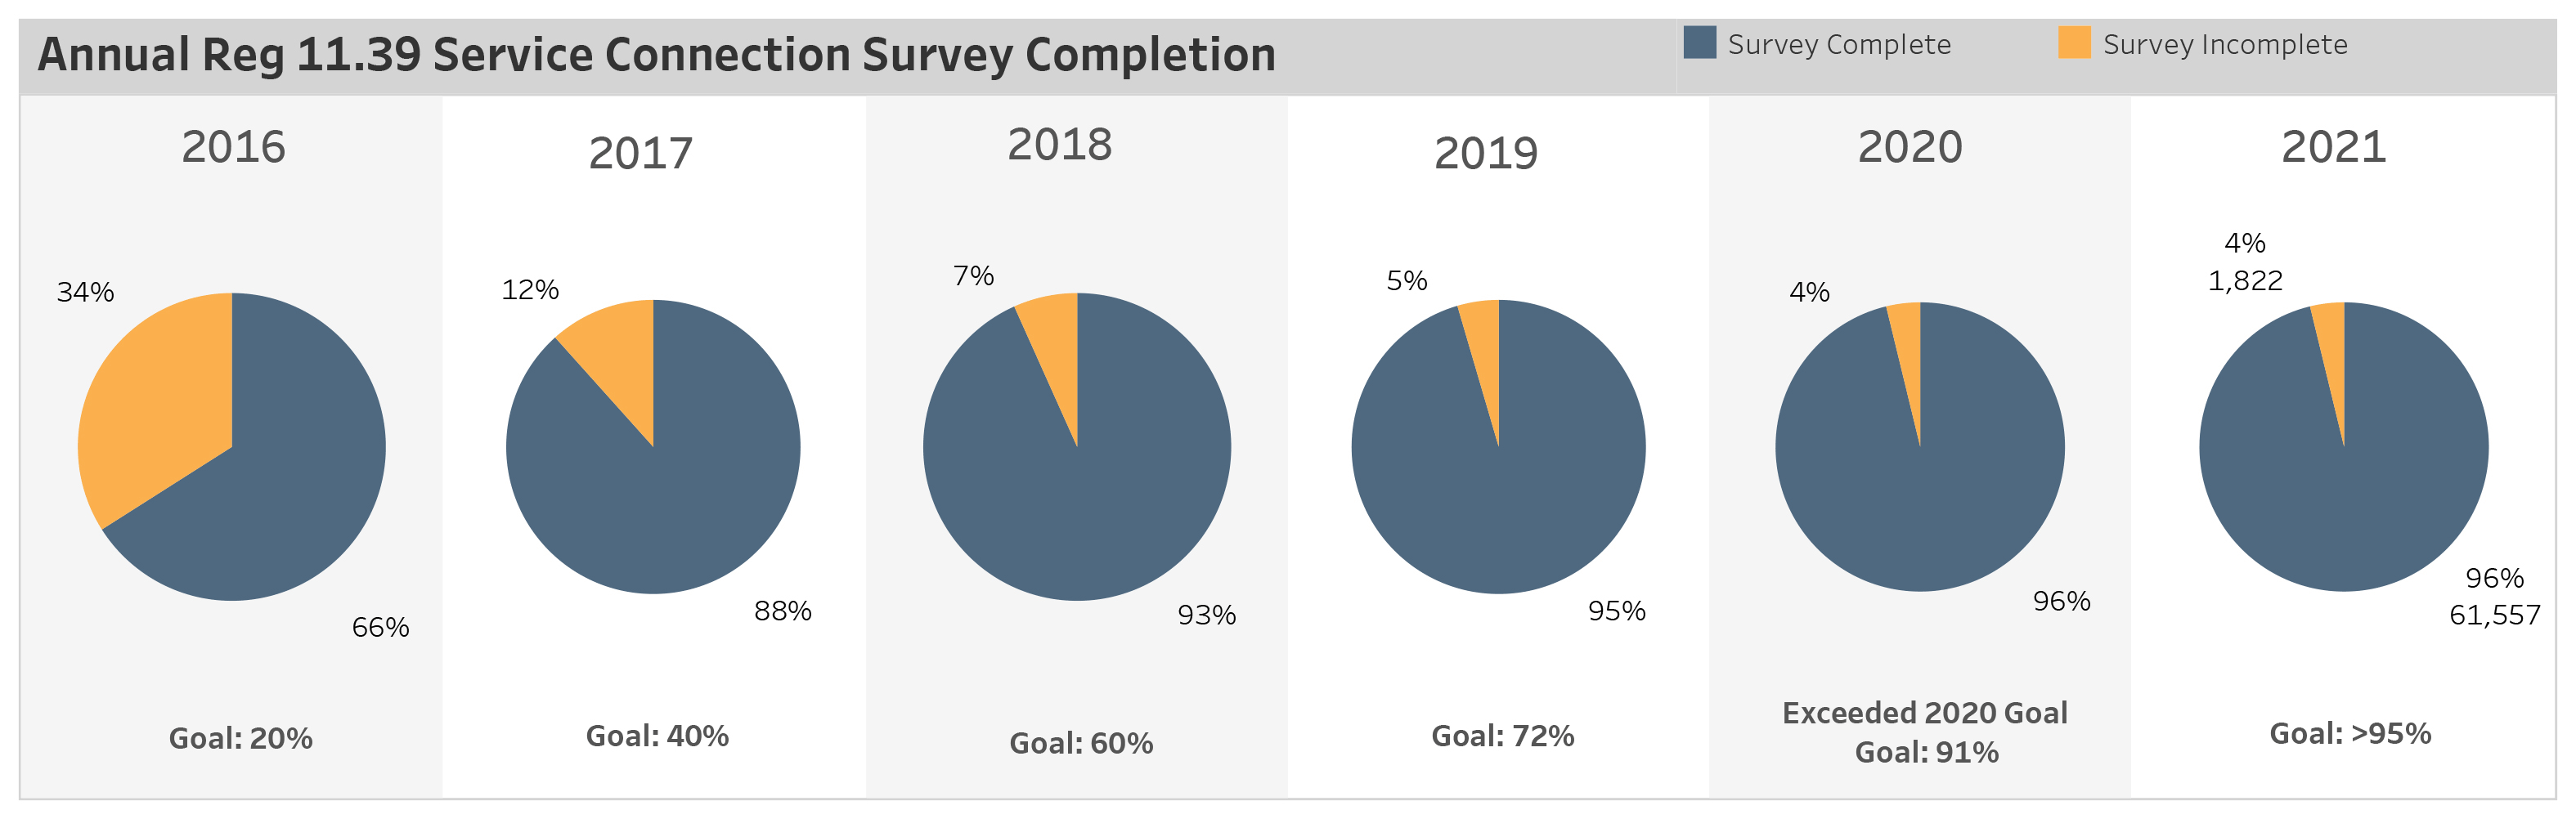 In 2016, there was 66% completion rate, in 2017 88% completion rate, in 2018 a 93% completion rate, in 2019 a 95 percent completion rate, in 2020 a 96% completion rate (the goal was 91%), in 2021 a 96% completion rate (the goal was more than 95%).